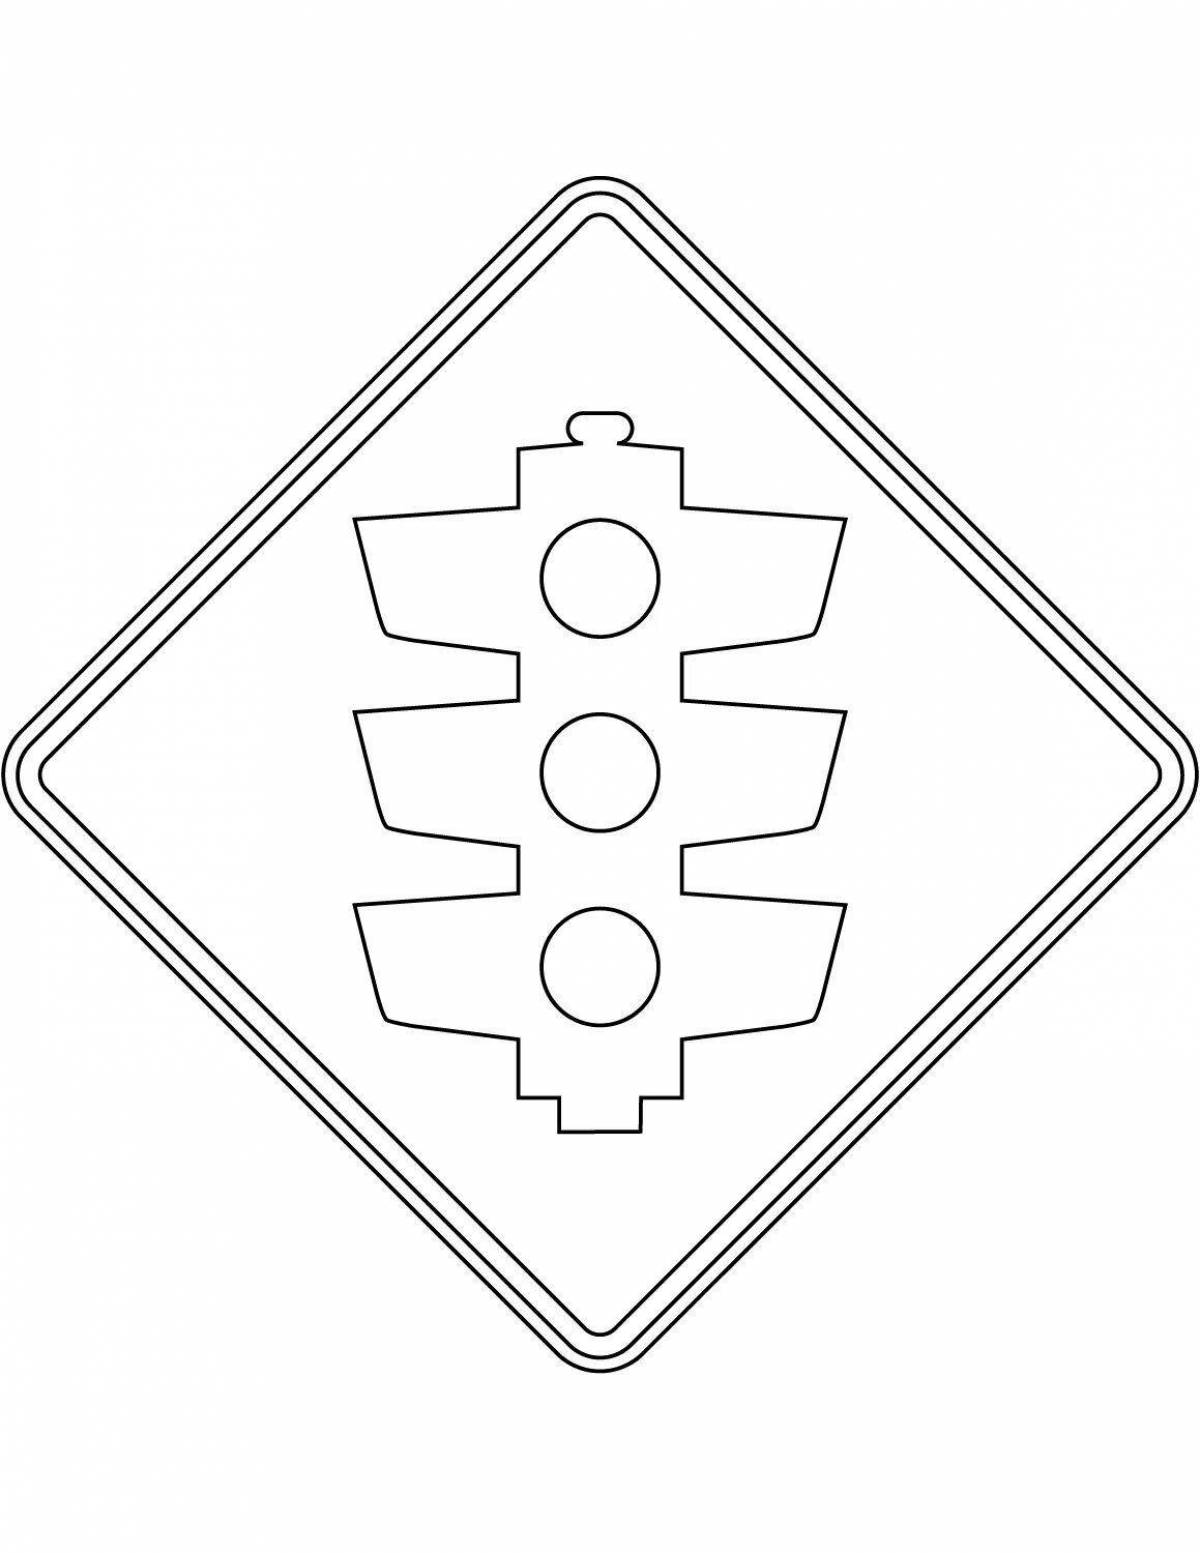 Coloring page dazzling give way sign